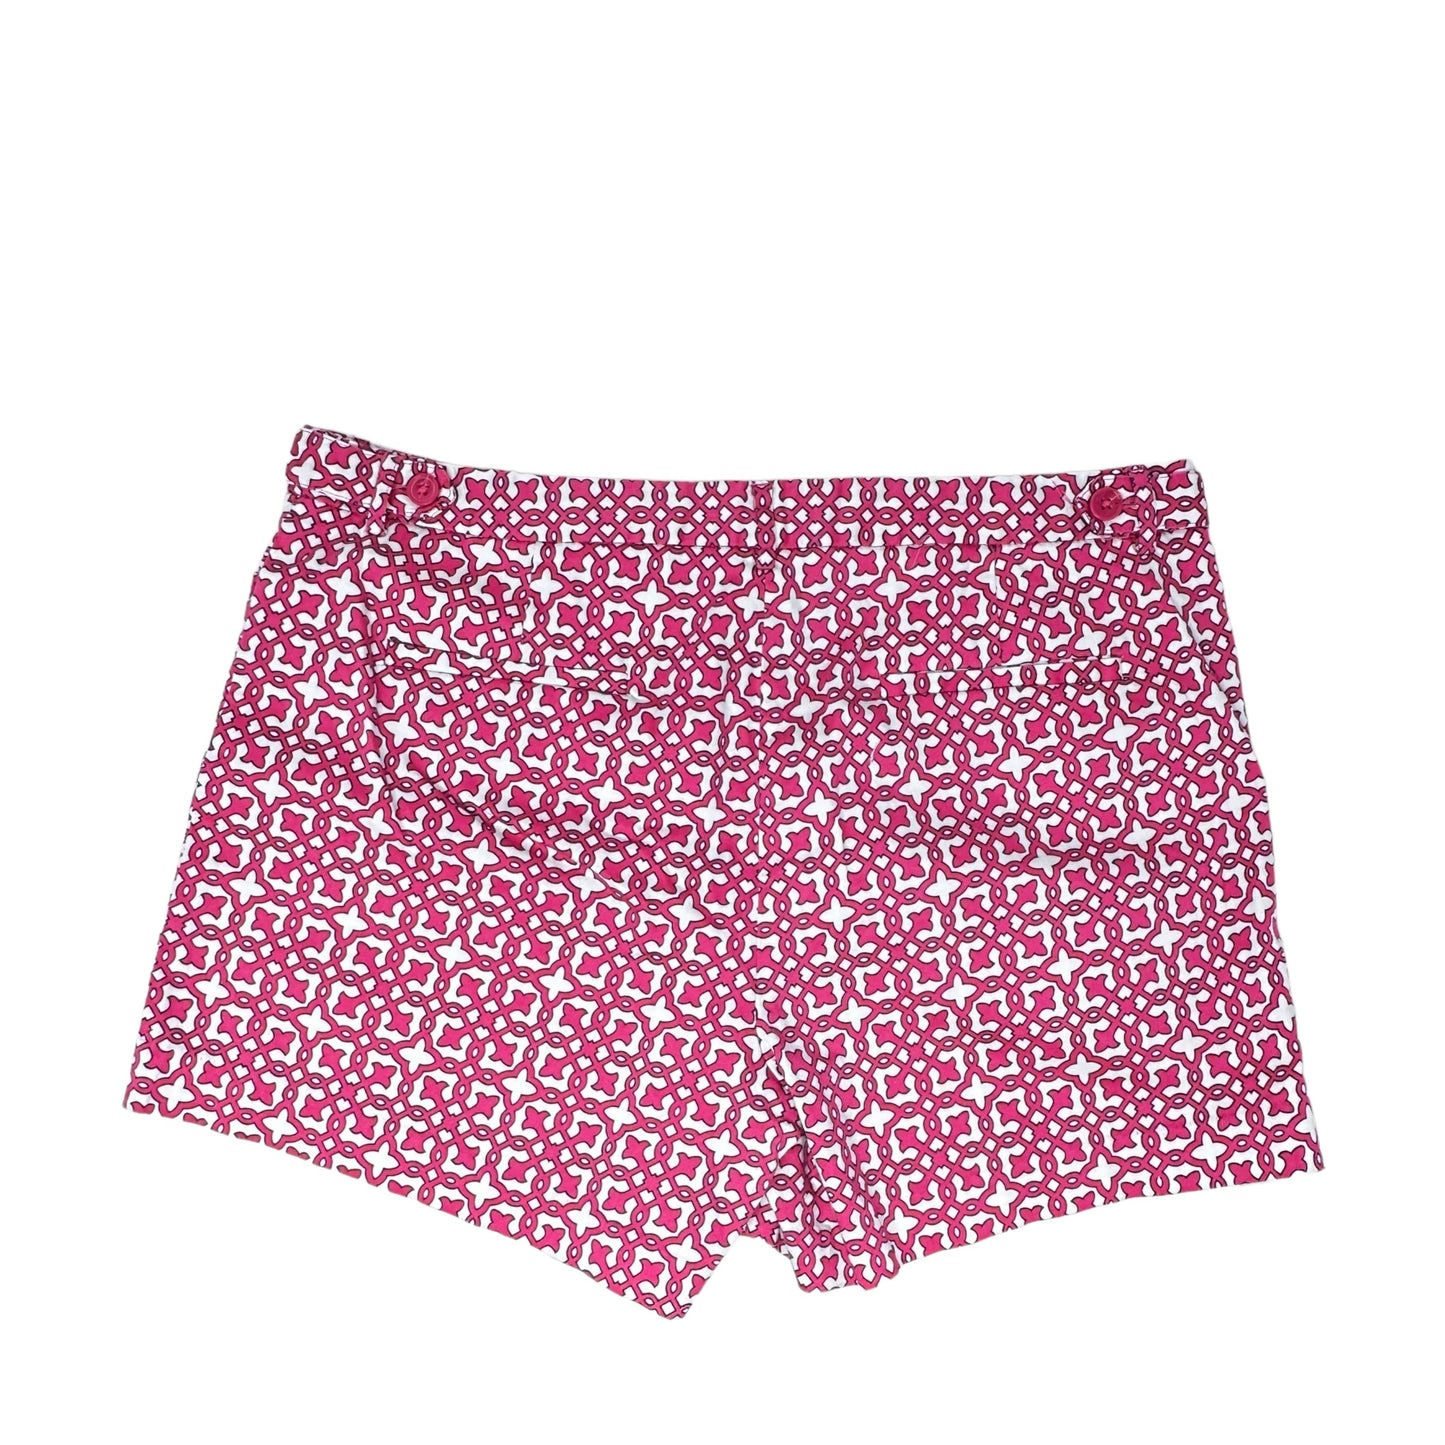 Pink & White Shorts Laundry By Shelly Segal, Size 10